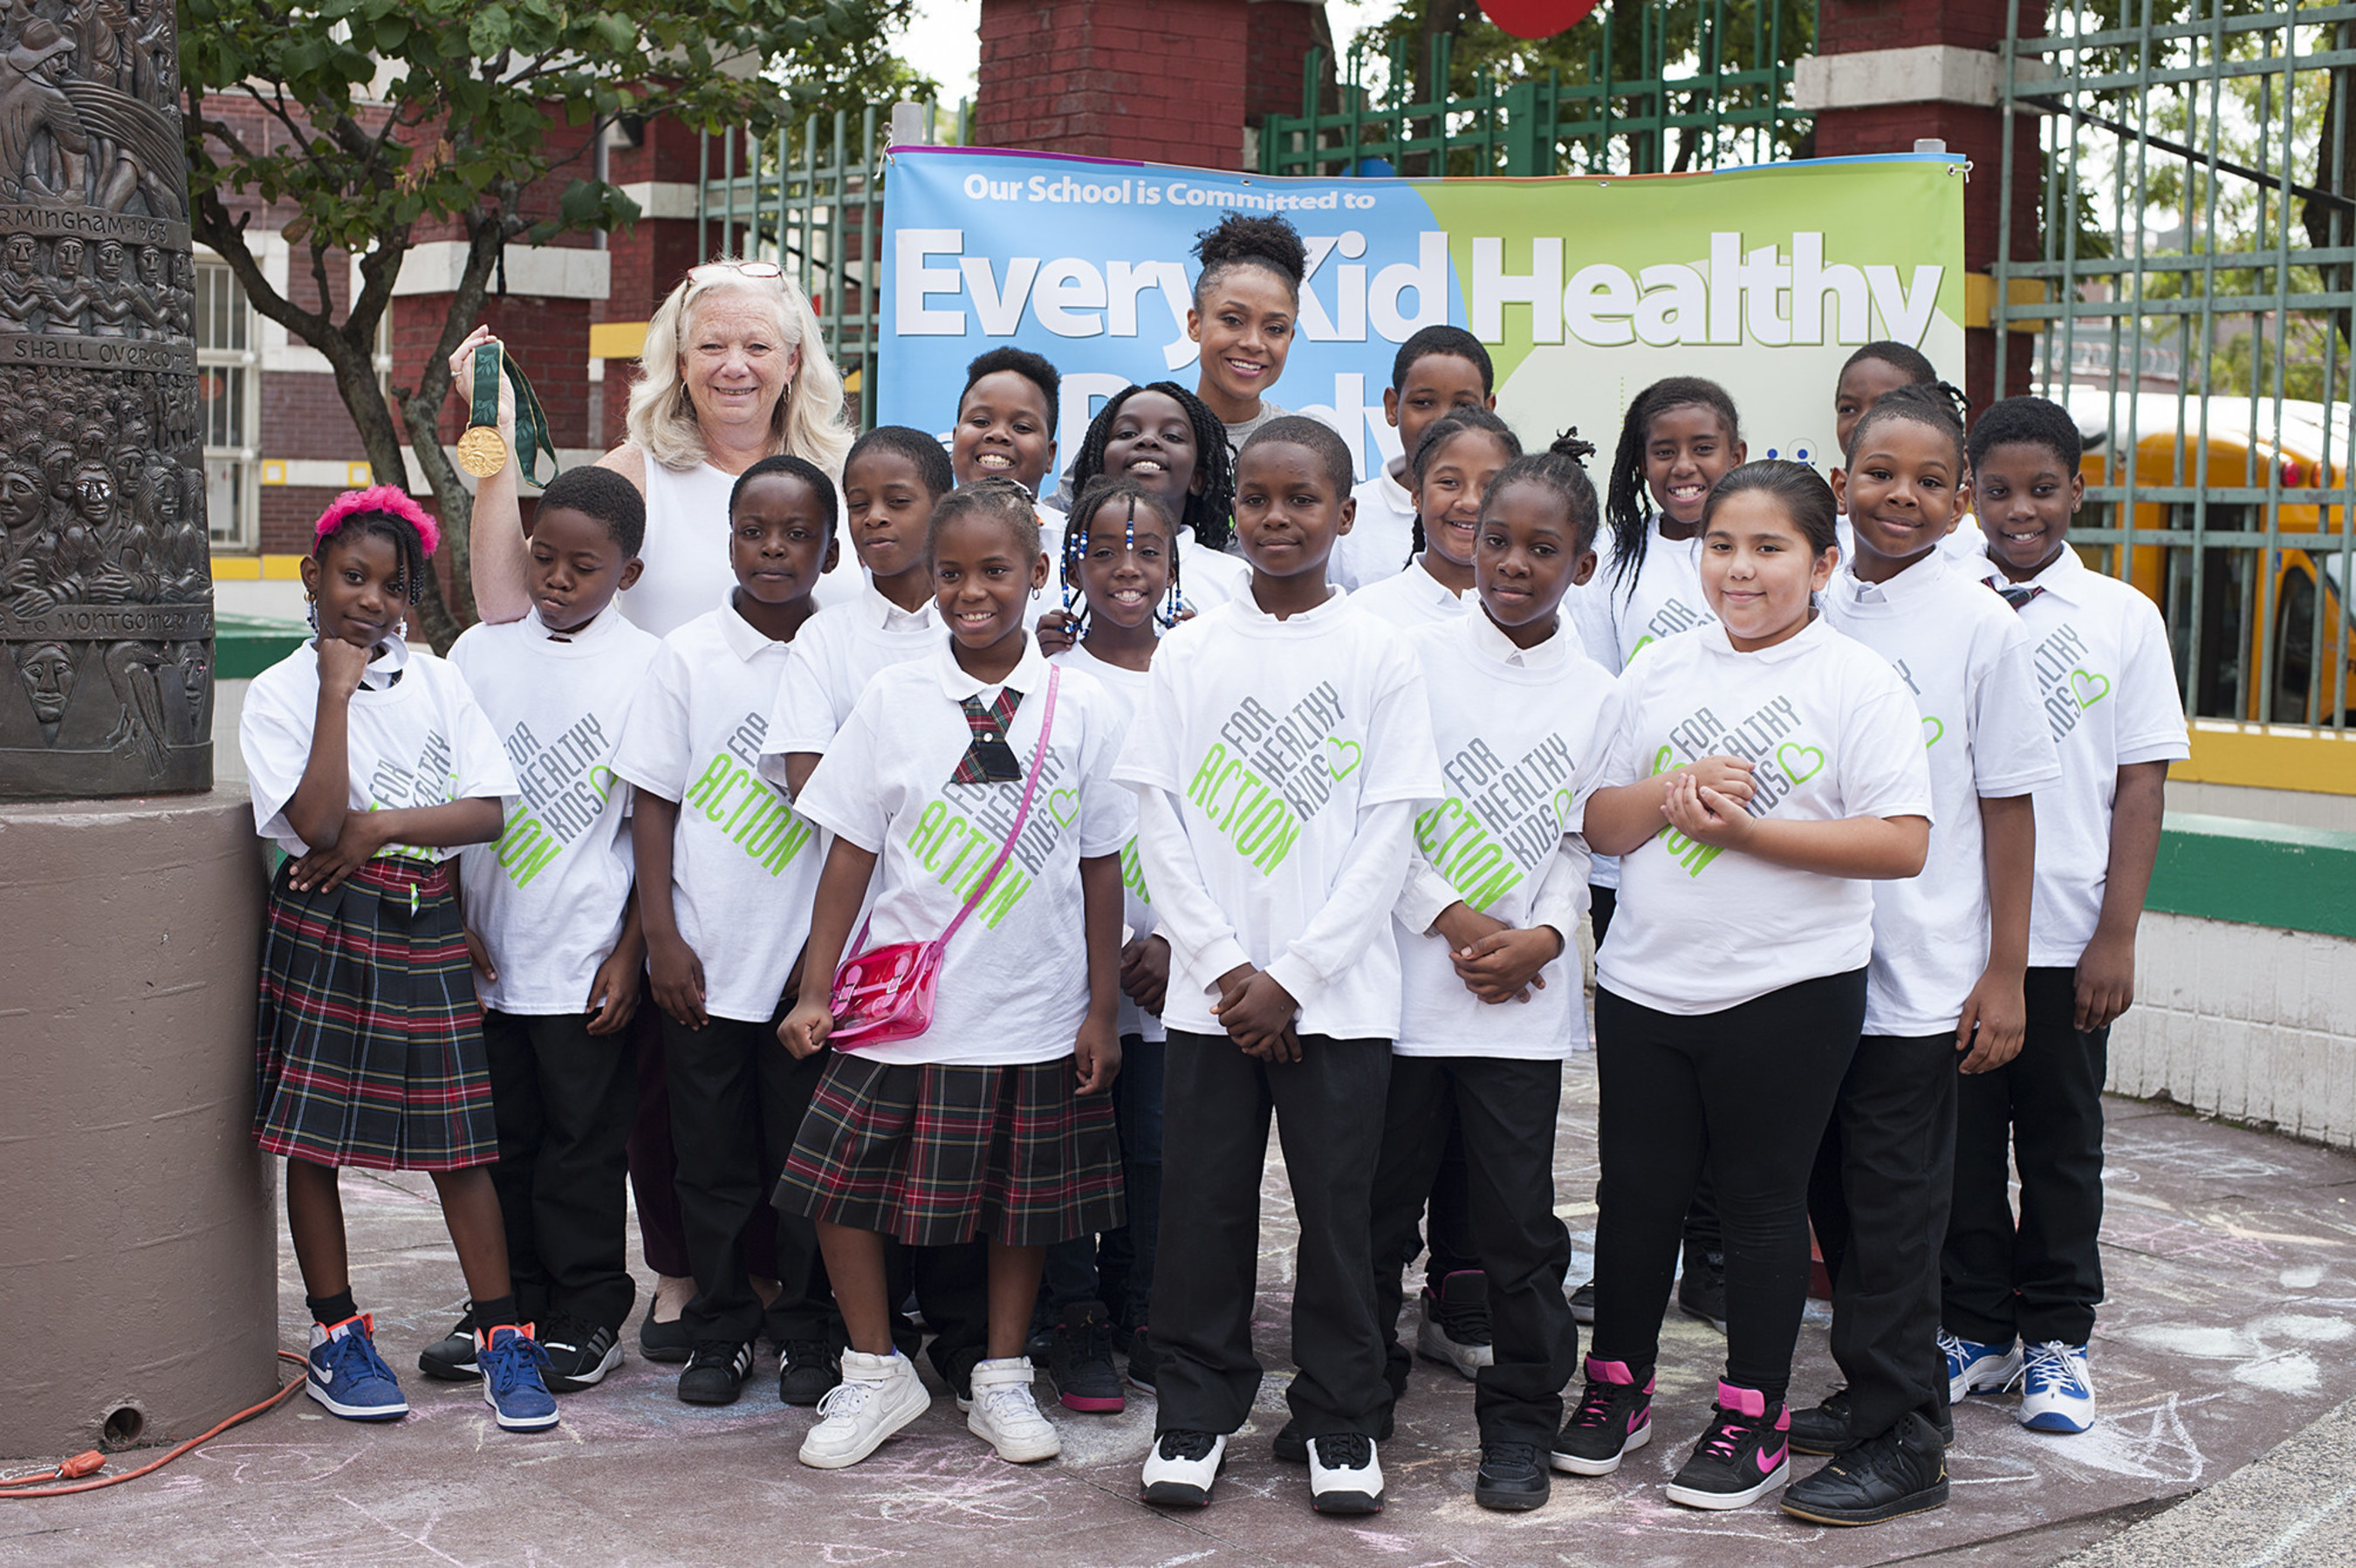 Dominique Dawes, Olympic Gold Medalist and GoGo squeeZ Goodness Ambassador, is all smiles with students at P.S. 6 in Brooklyn, NY after leading a workout and announcing a grant to improve access to healthy foods and fitness on behalf of GoGo squeeZ and Action for Healthy Kids on September 21, 2016. (Photo by Phillip Reed).